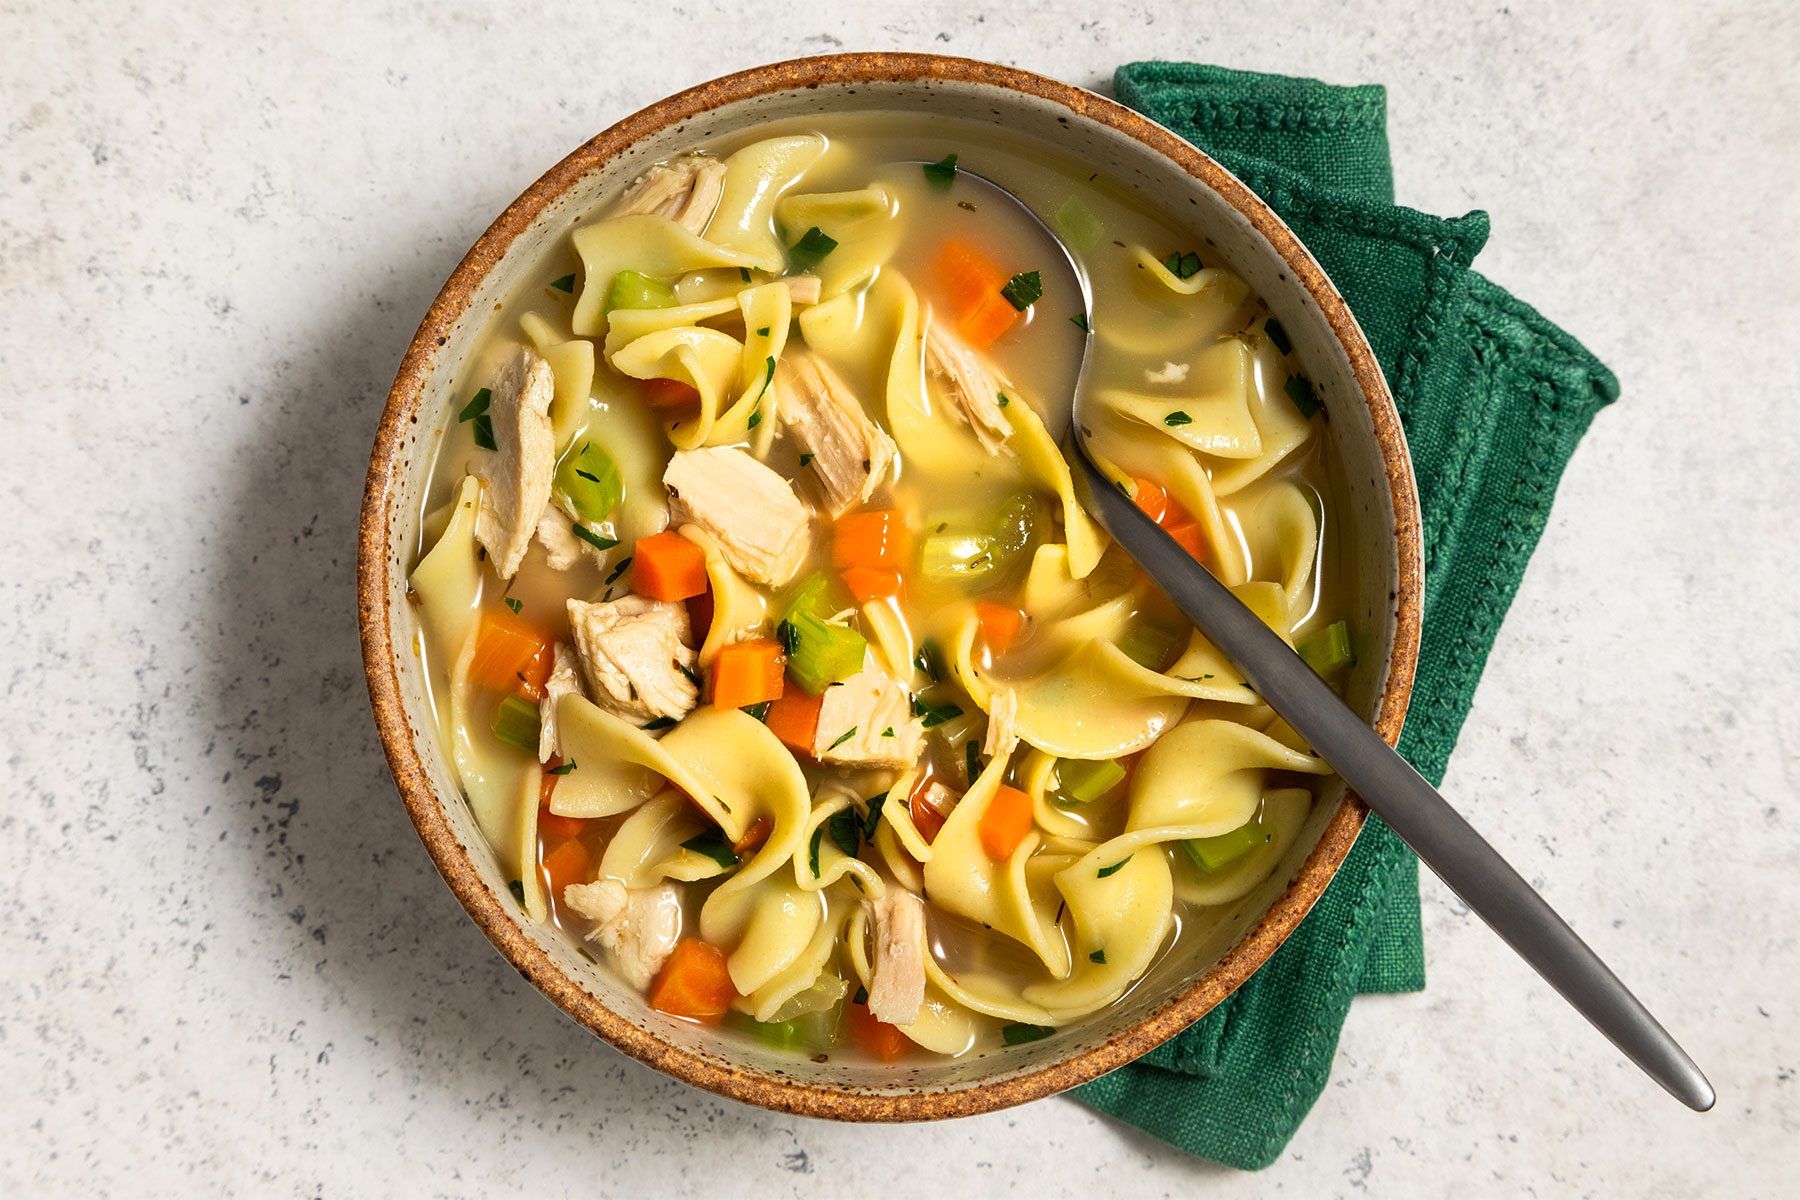 Turkey Noodle Soup served in a bowl with spoon and green tissue